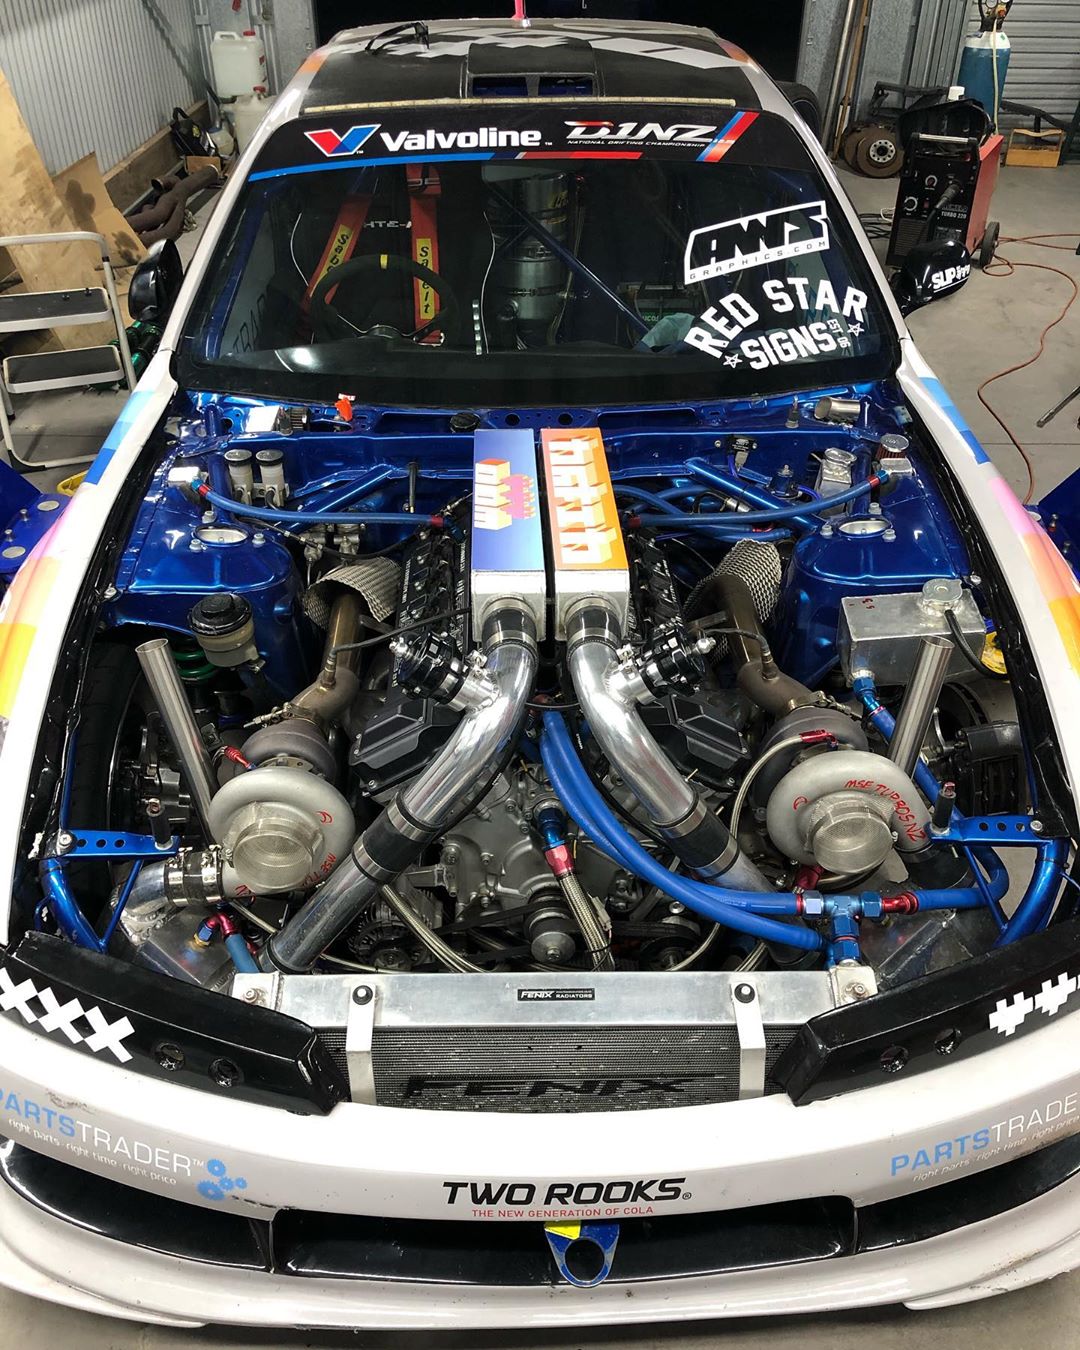 Jaron Olivecrona Nissan S14 with a twin-turbo 1GZ V12